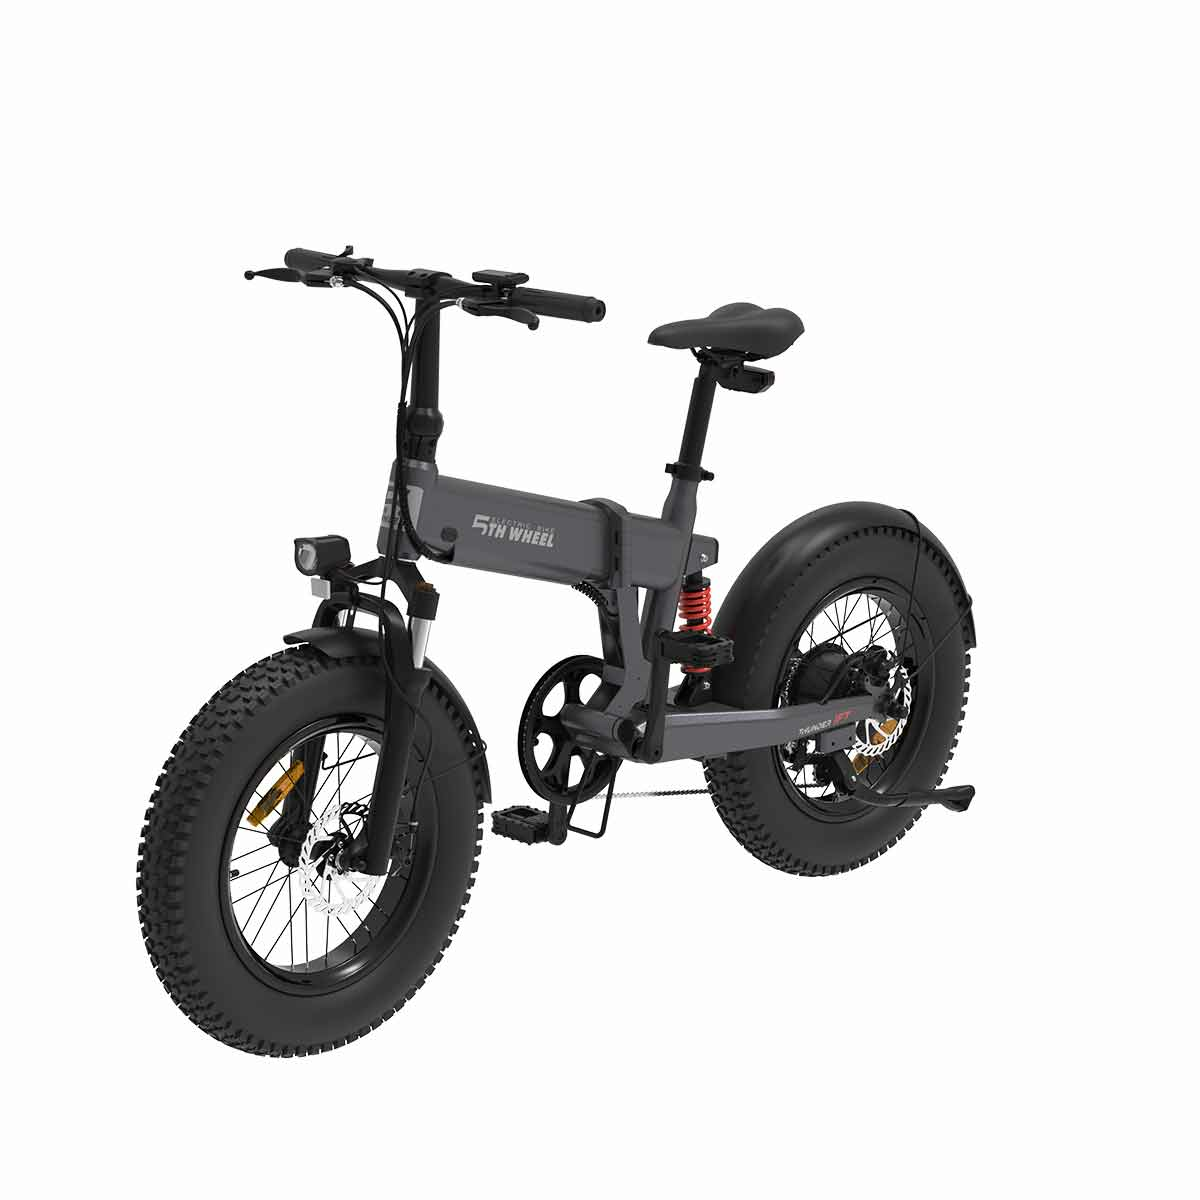 

[USA DIRECT] 5TH WHEEL Thunder 1FT(EB06) 48V 10Ah 500W 20*4.0 Inch Electric Scooter 80KM Range 100KG Max Load